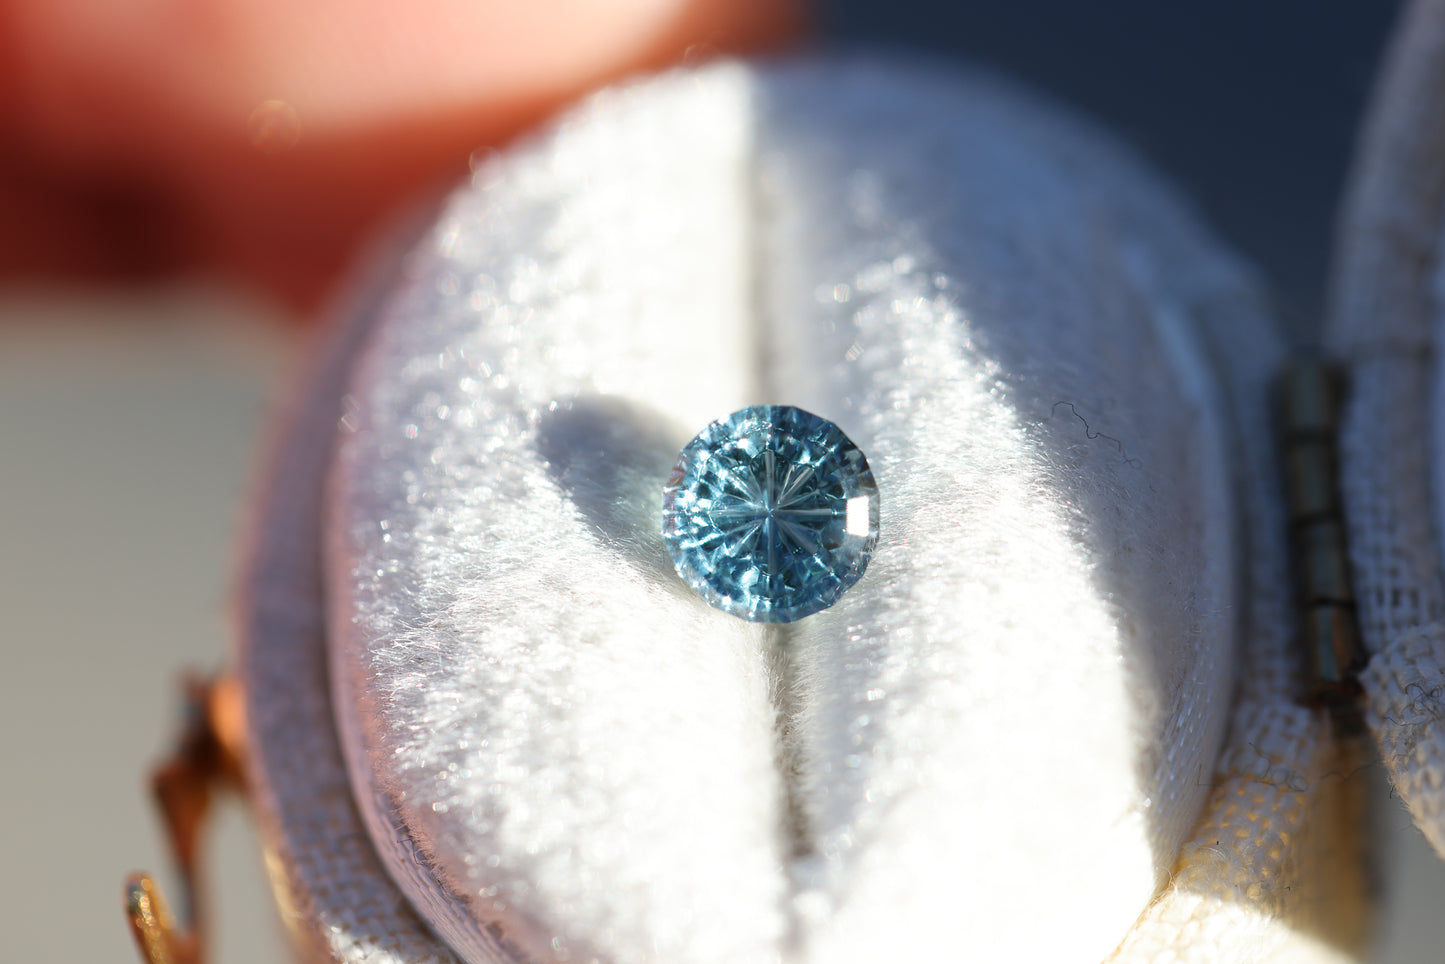 Load image into Gallery viewer, 1.08ct round blue teal sapphire - Starbrite cut by John Dyer
